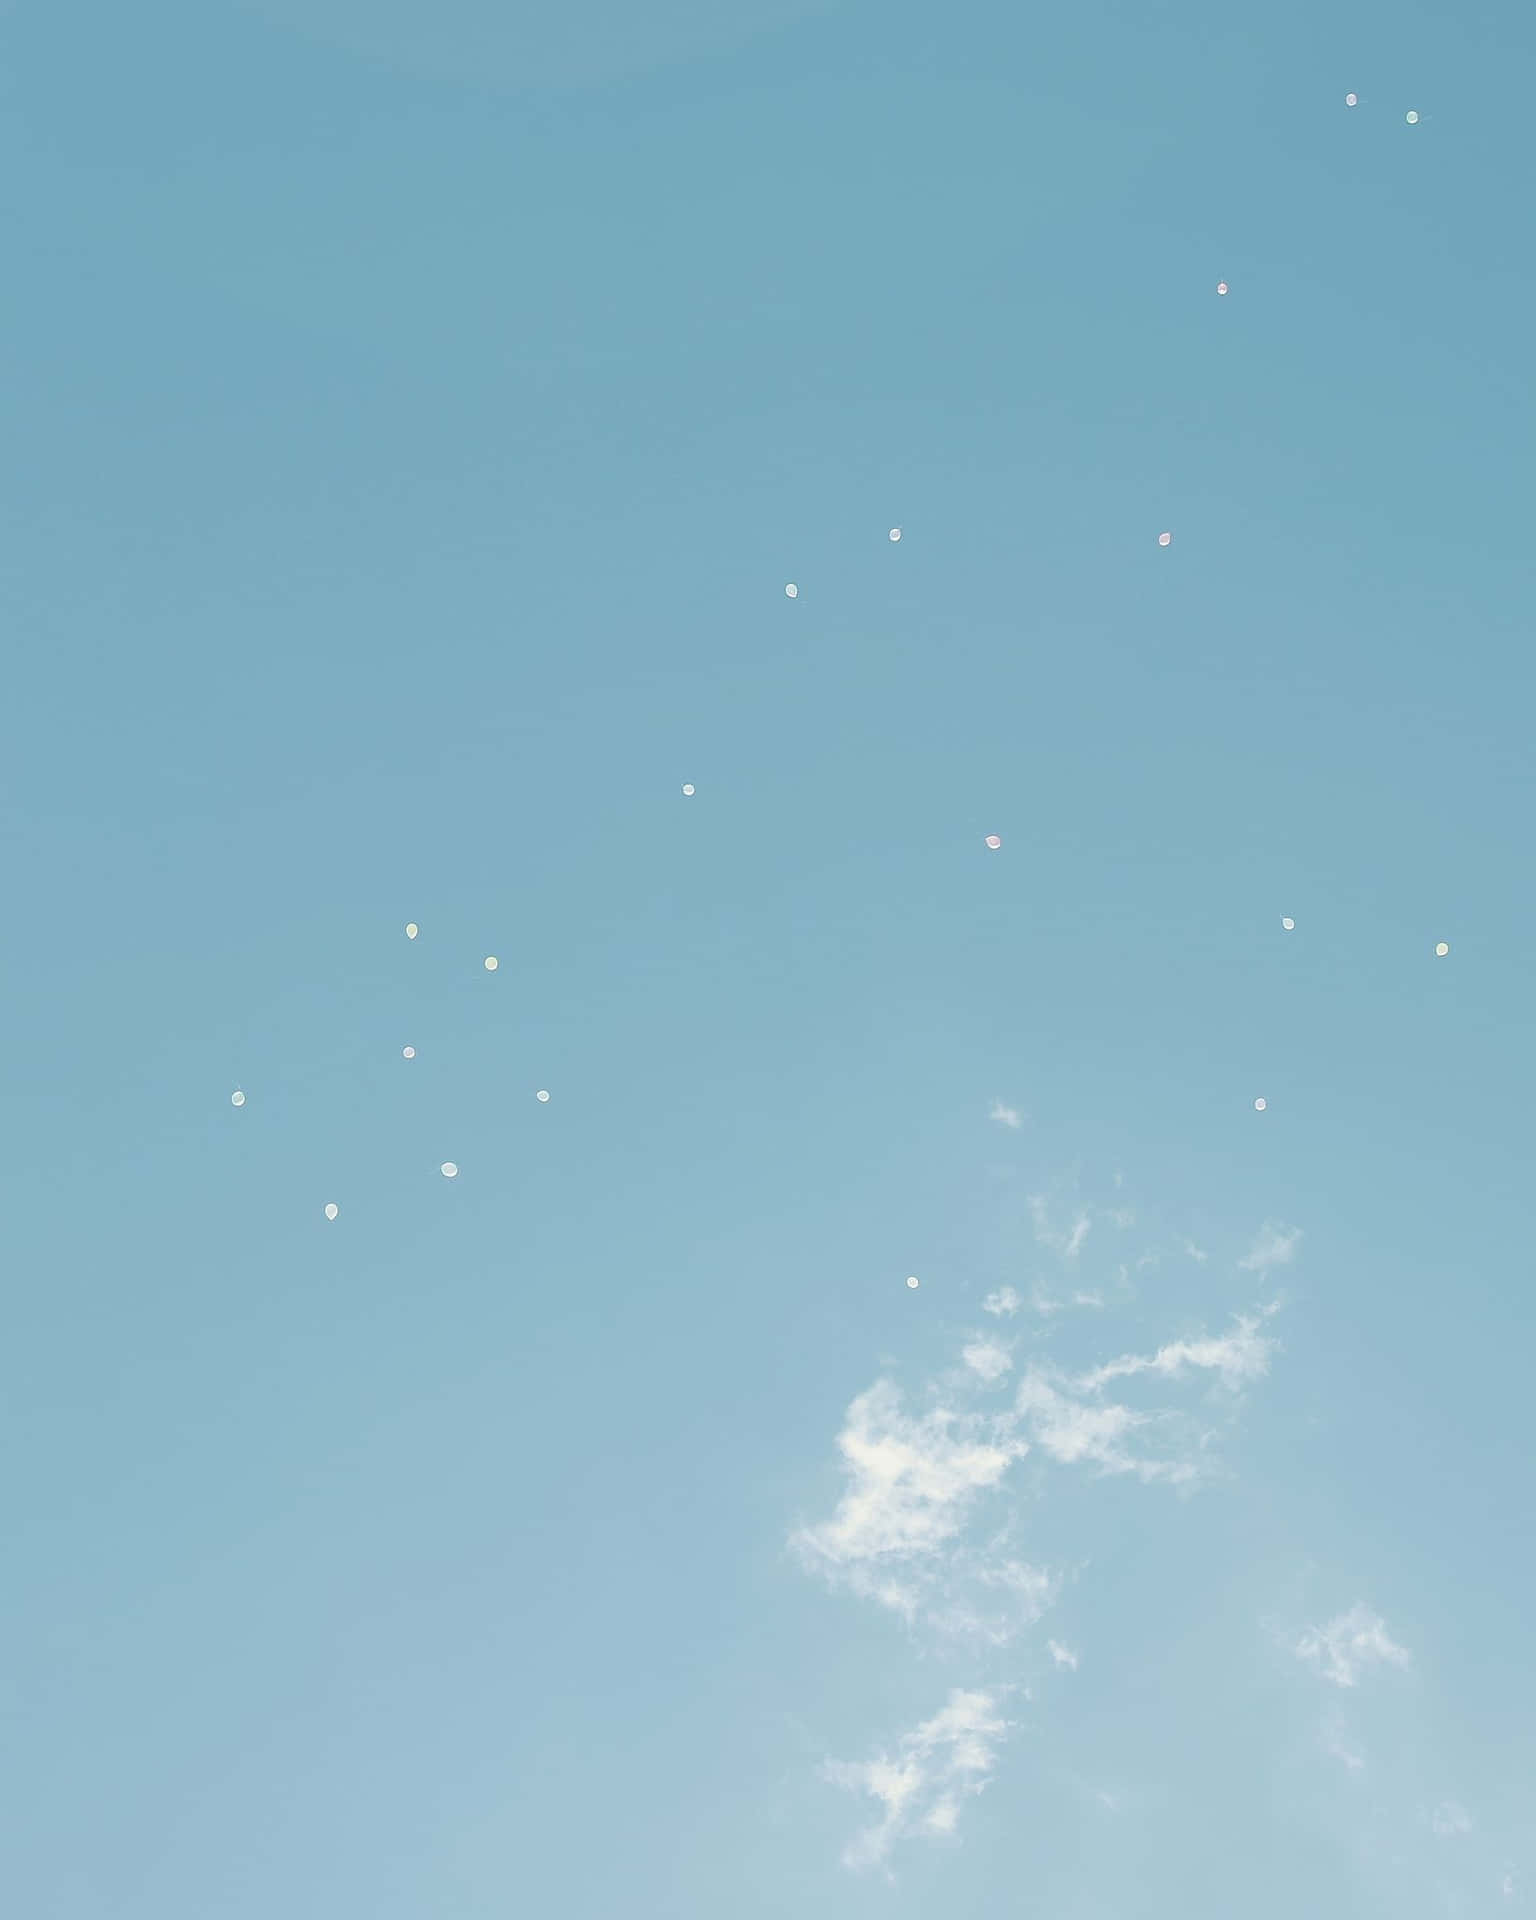 Cloud And White Dots Aesthetic Light Blue Background